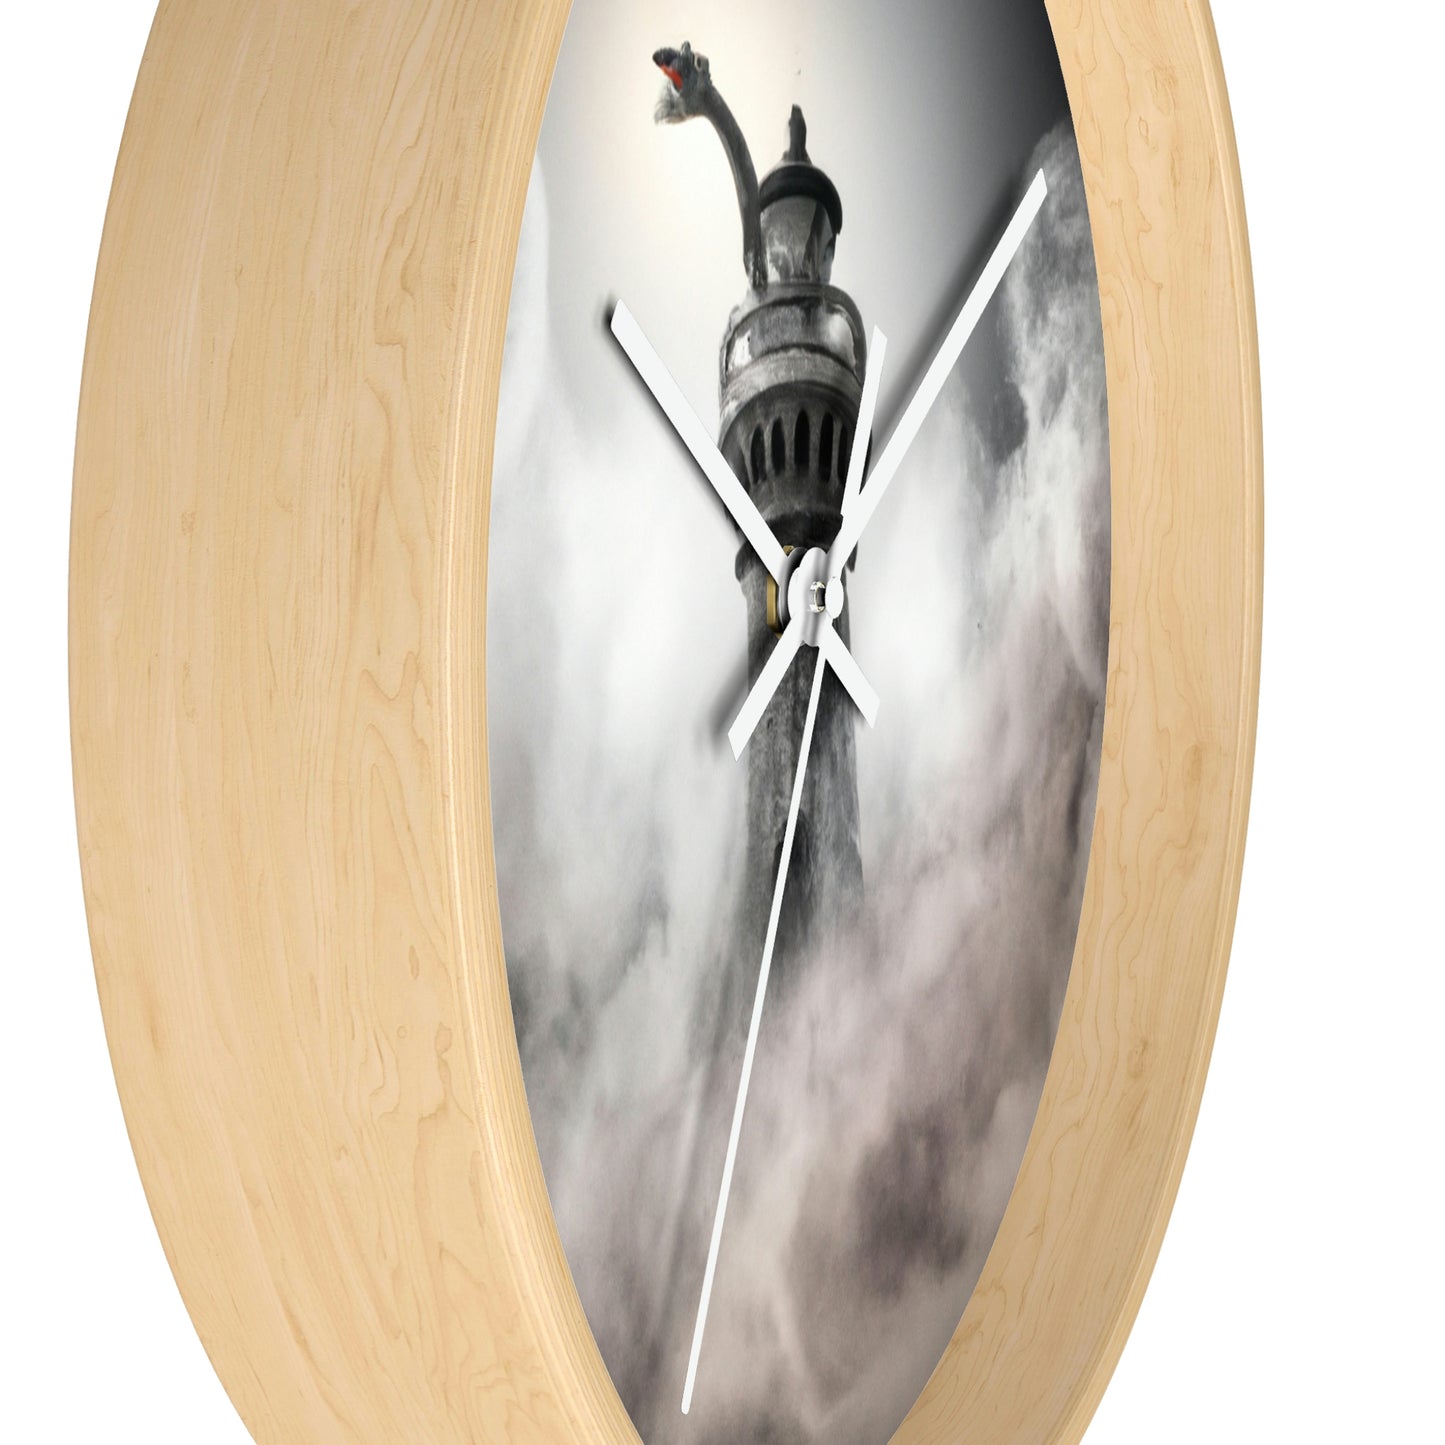 "Smoke and Lighthouse Keeper" - The Alien Wall Clock